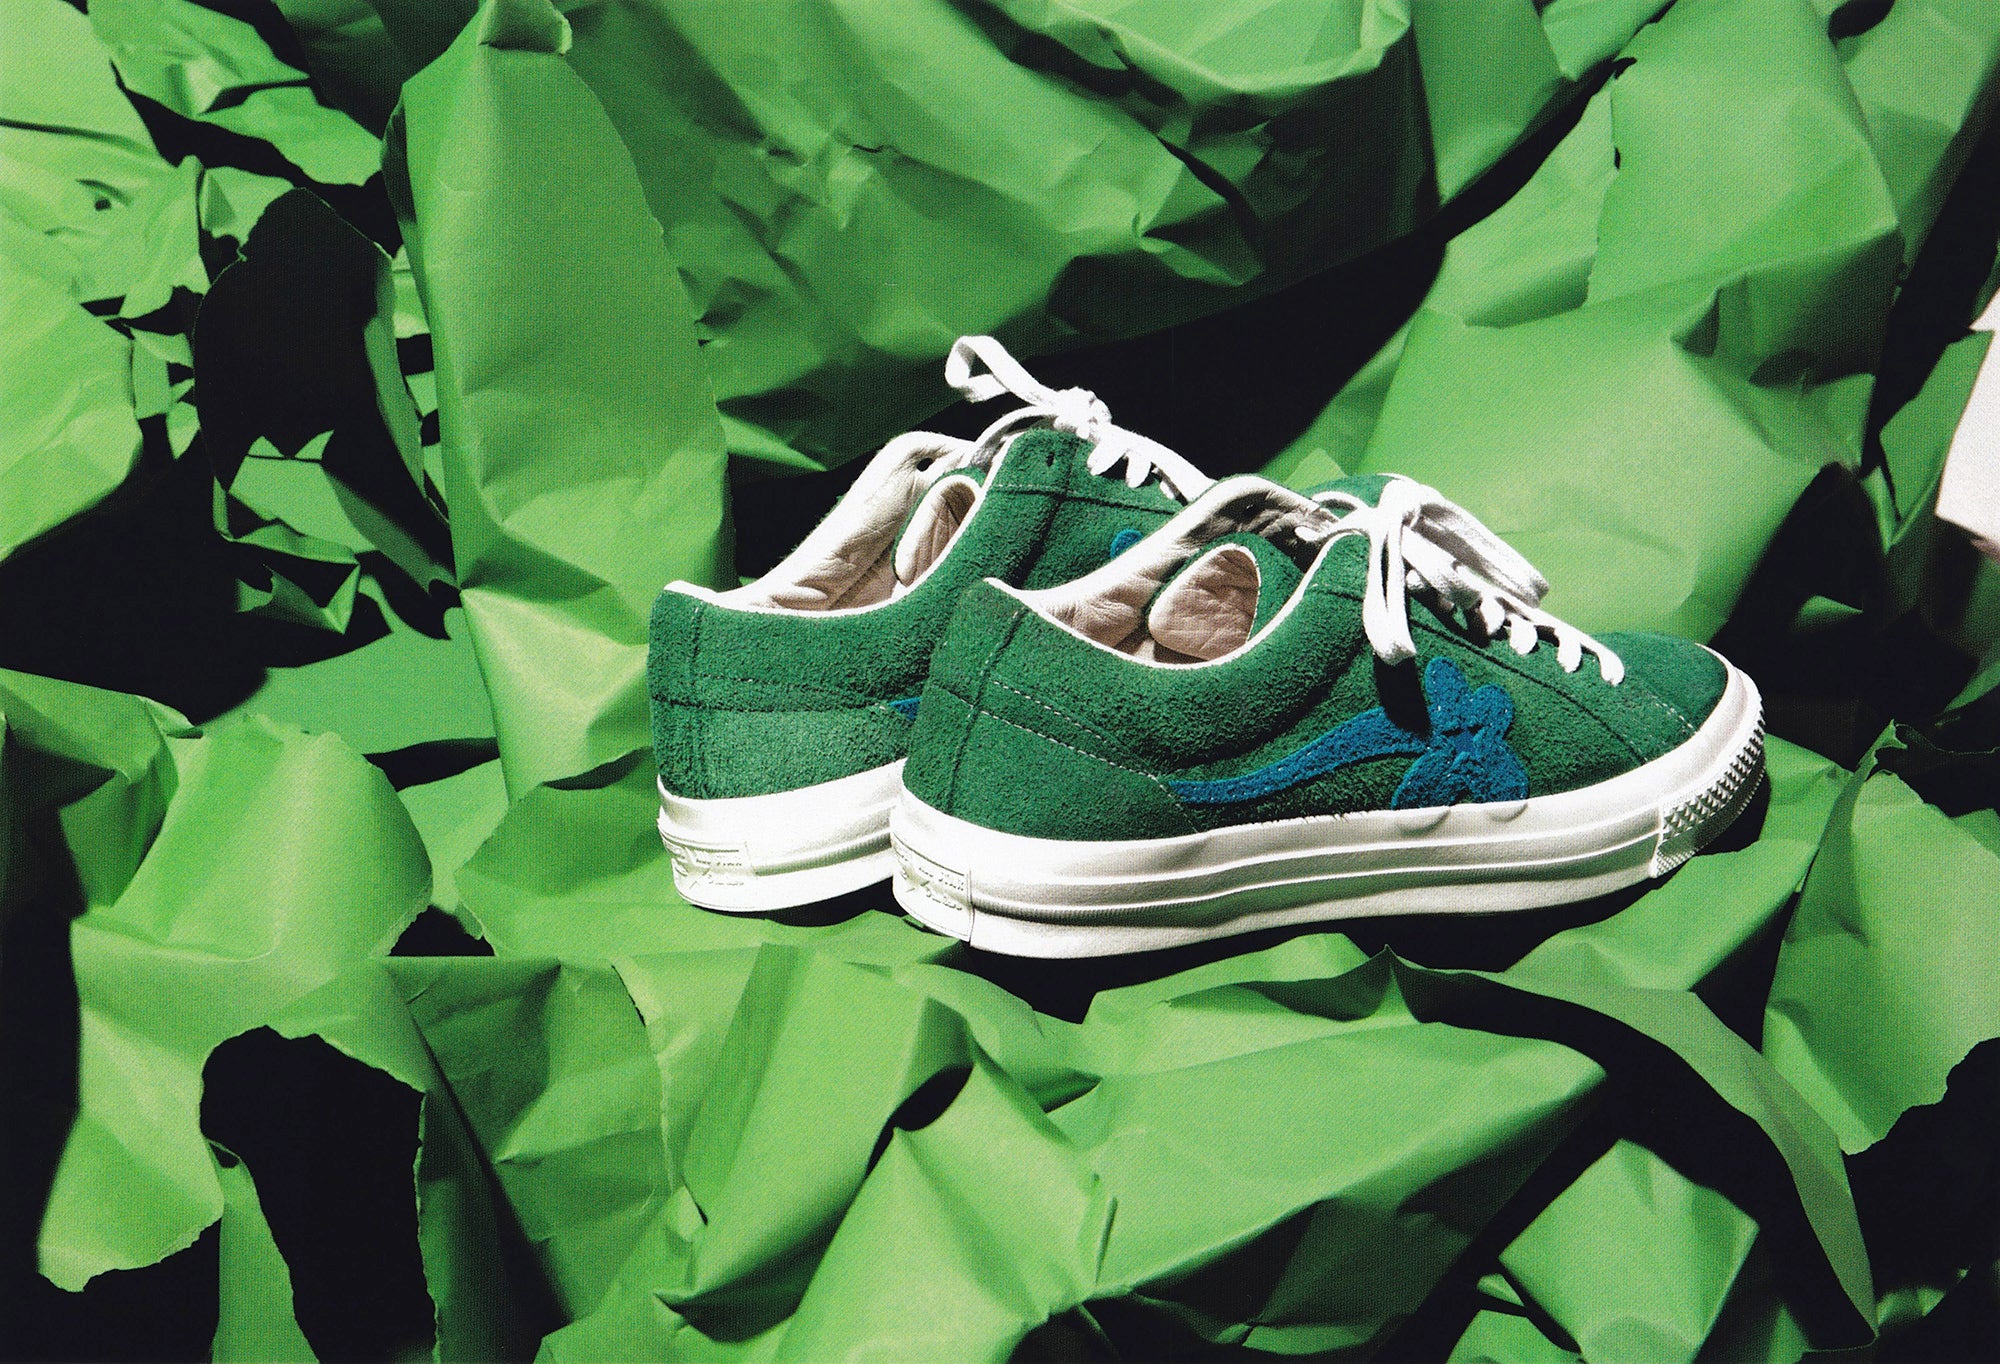 converse x tyler the creator shoes